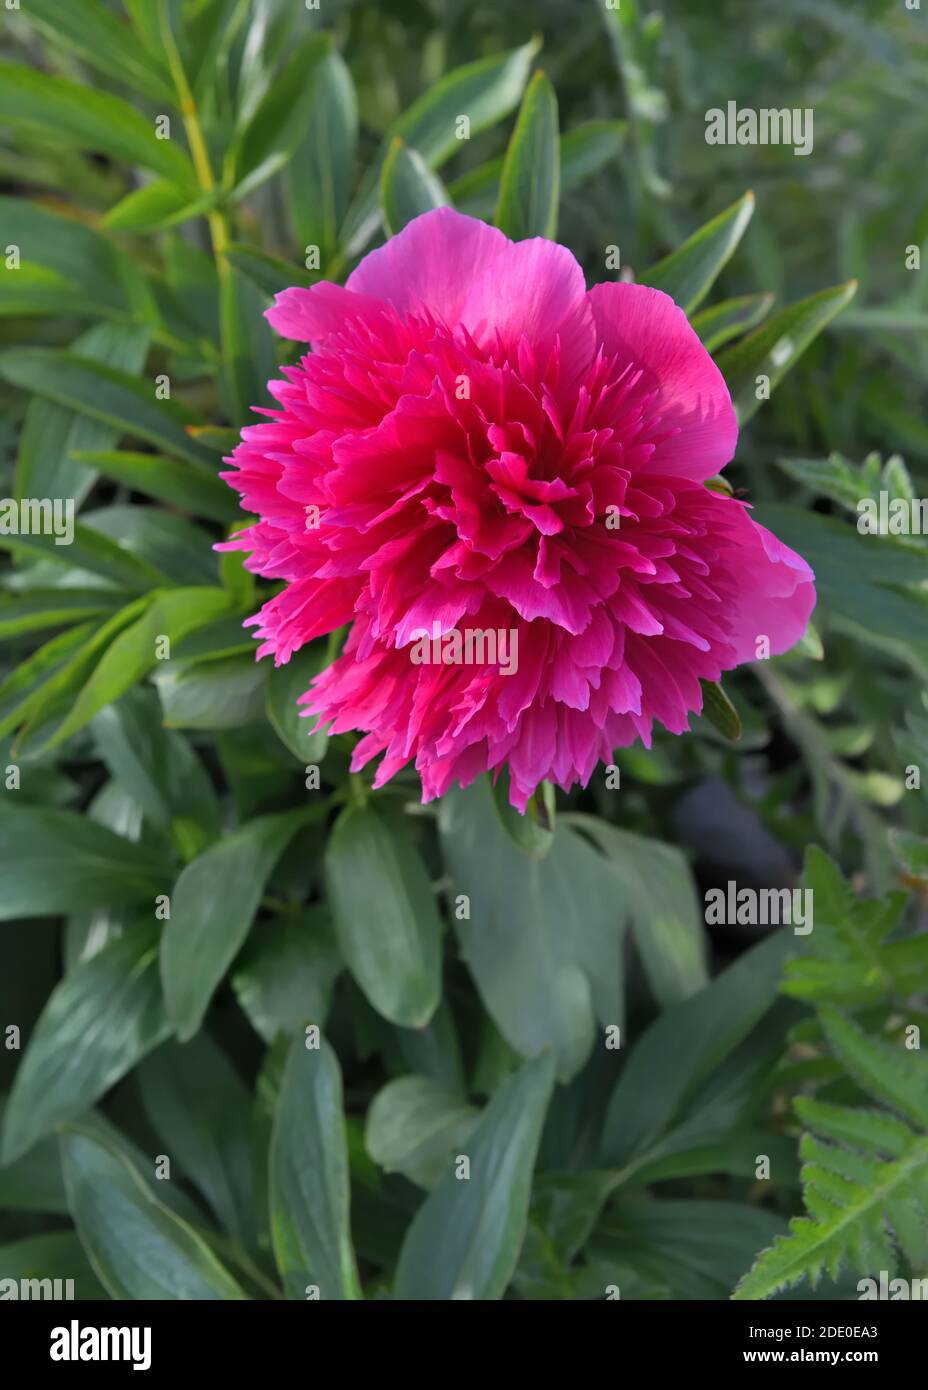 A pink Peony rose with green foliage flowering in garden. Stock Photo